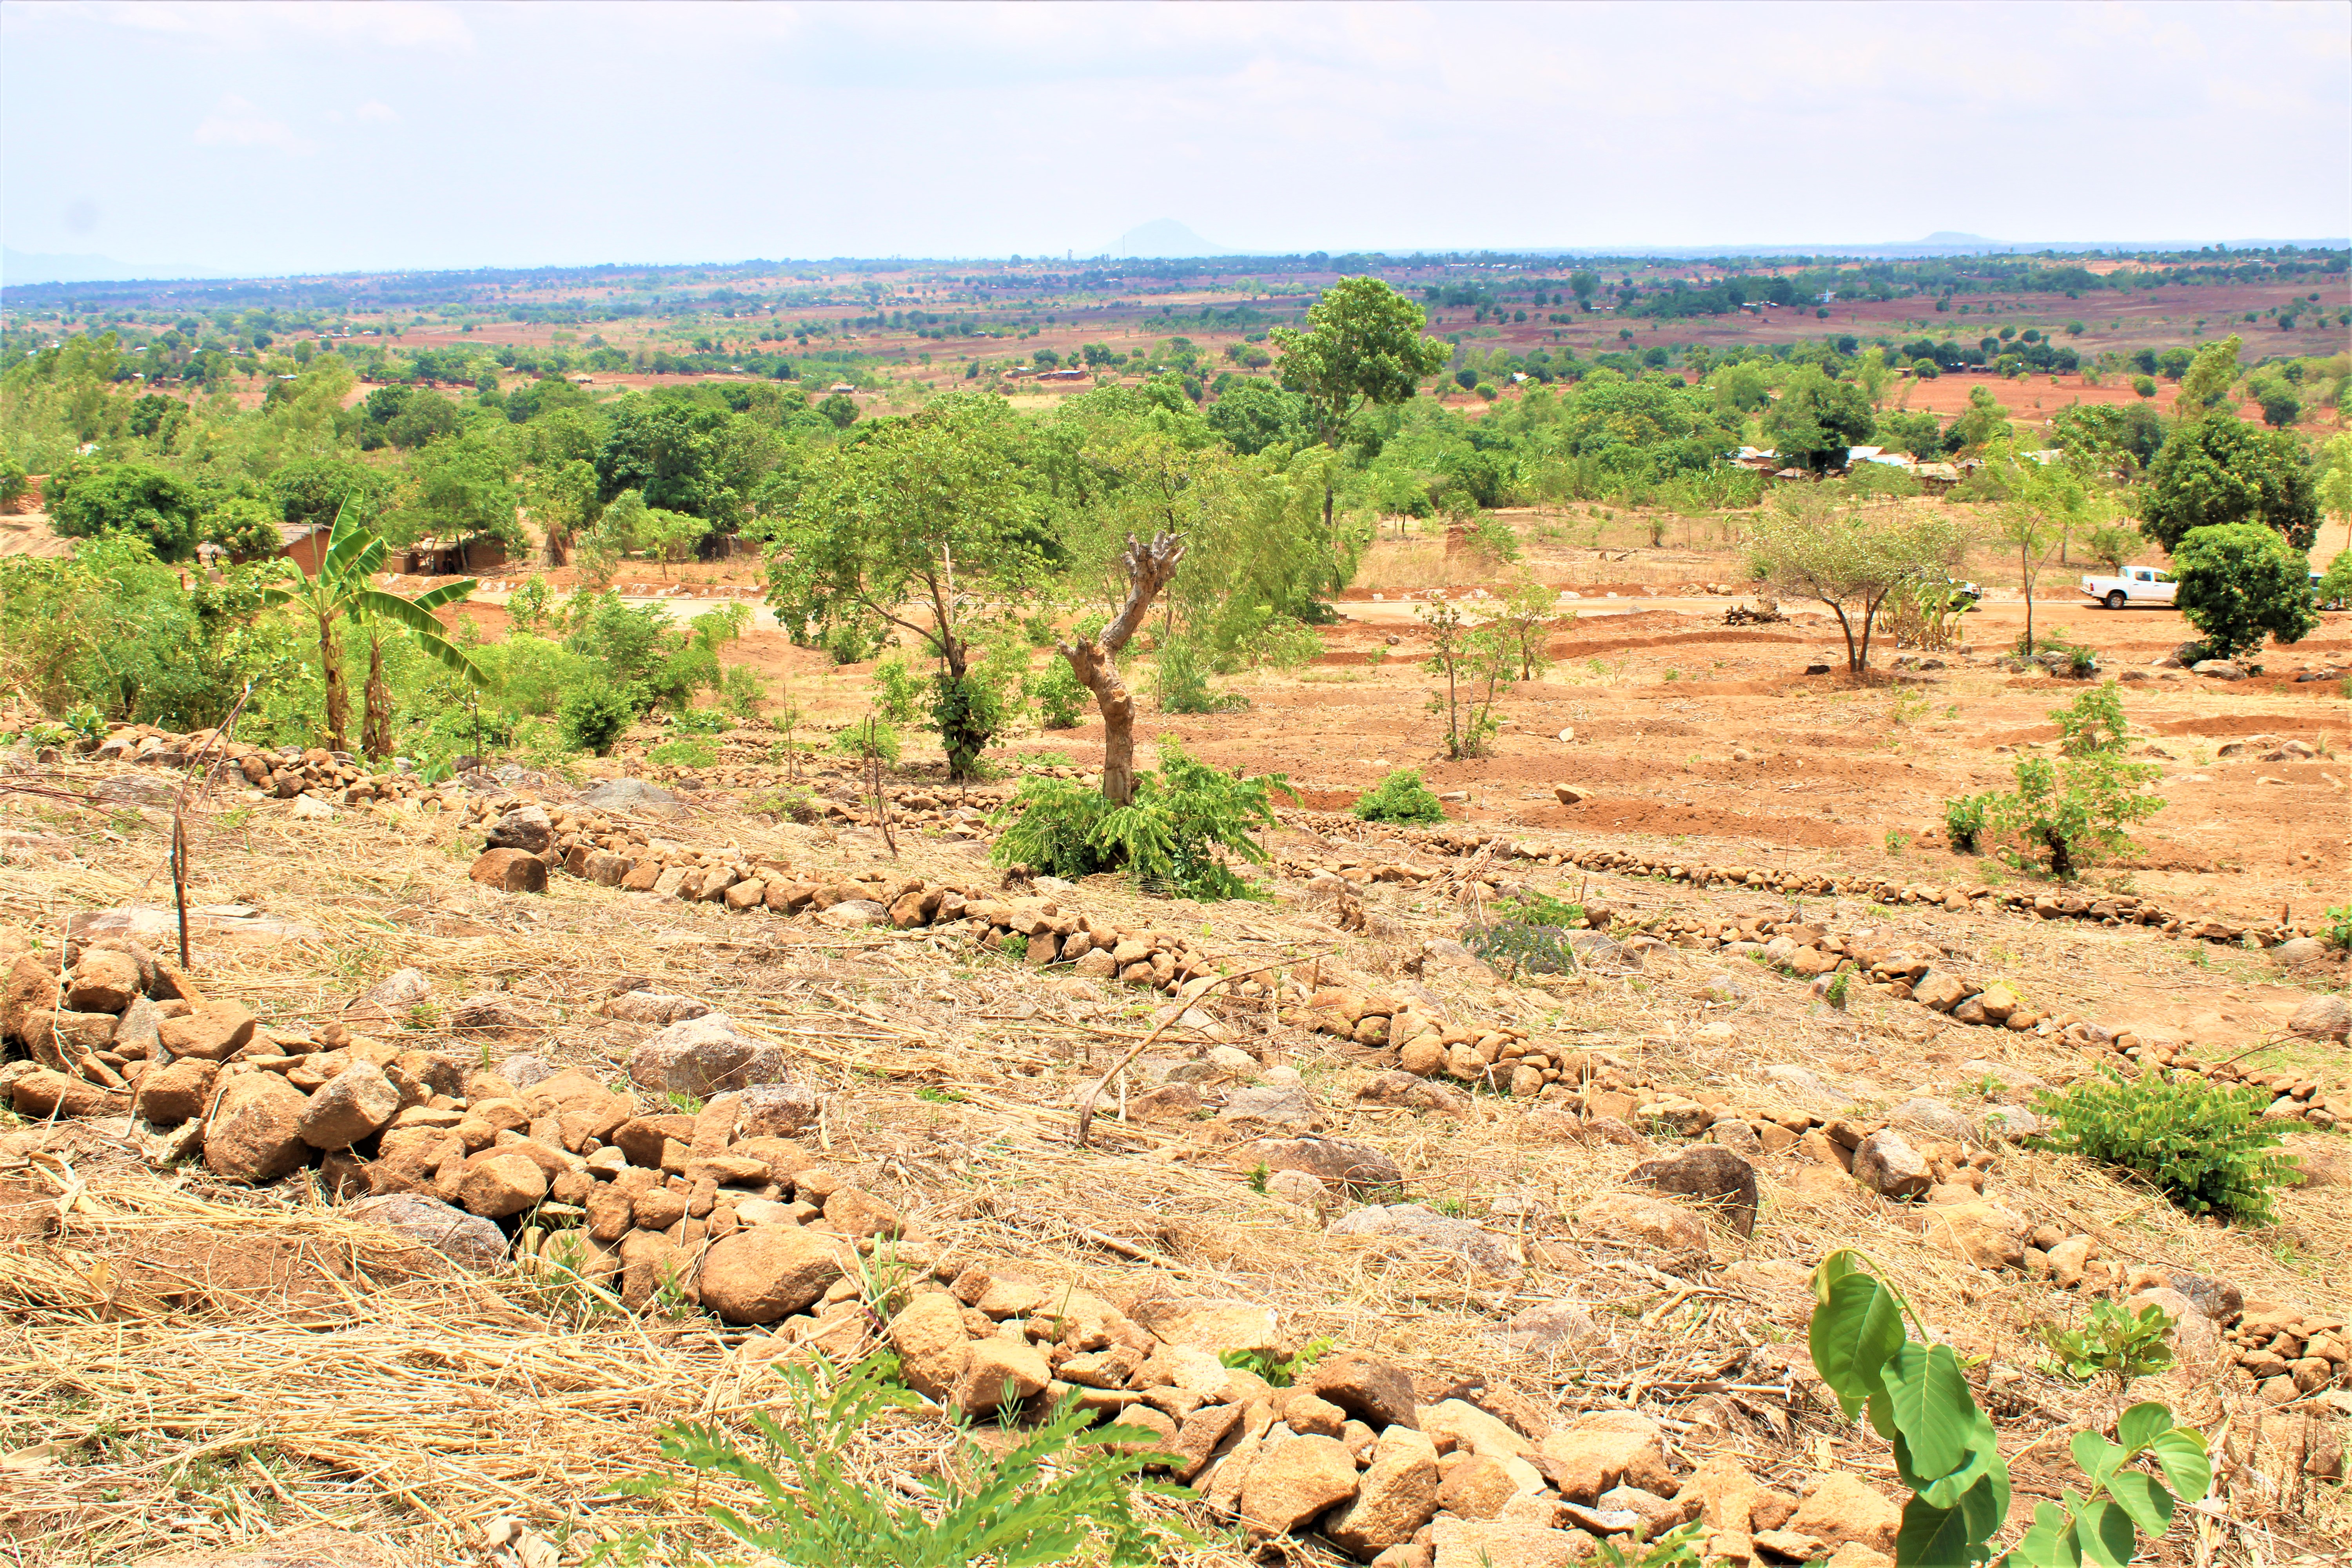 Communities have constructed Stone bunds to control the flow of water. (Credit: Felix Malamula, ERASP/PRIDE)